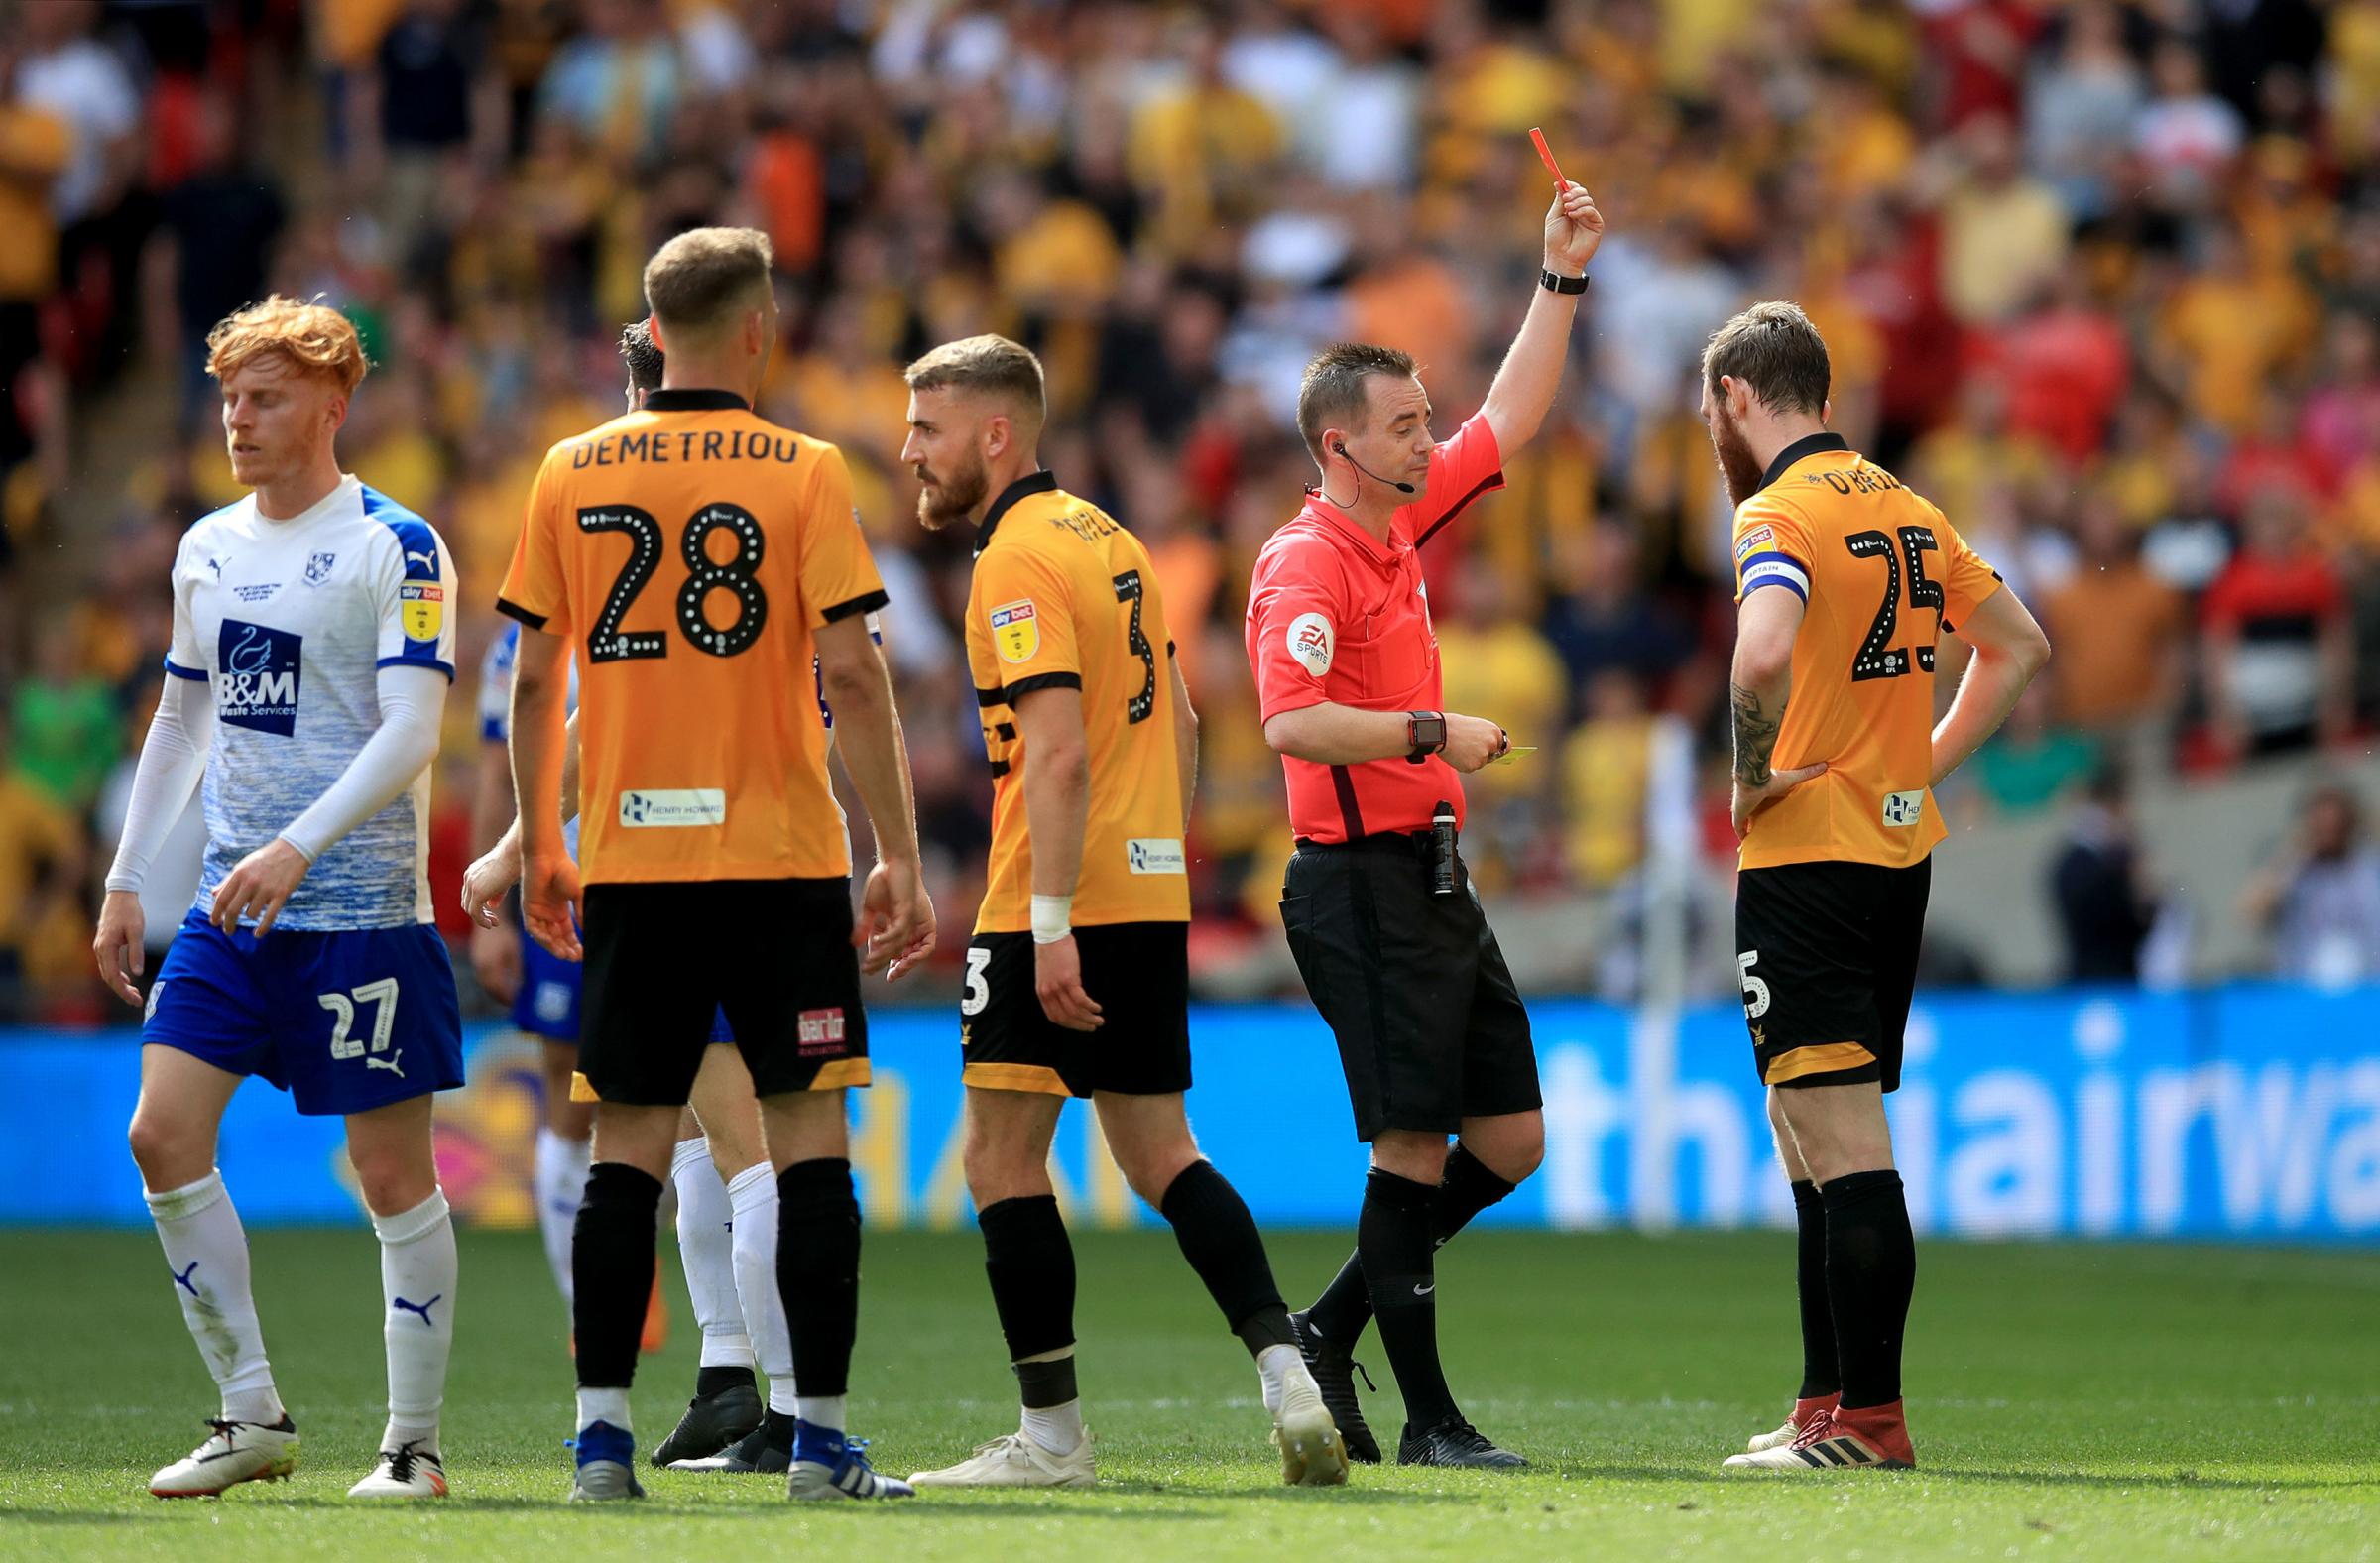 Match referee Ross Joyce shows a red card to Newport Countys Mark OBrien during the Sky Bet League Two Play-off final at Wembley Stadium, London. PRESS ASSOCIATION Photo. Picture date: Saturday May 25, 2019. See PA story SOCCER League Two. Photo